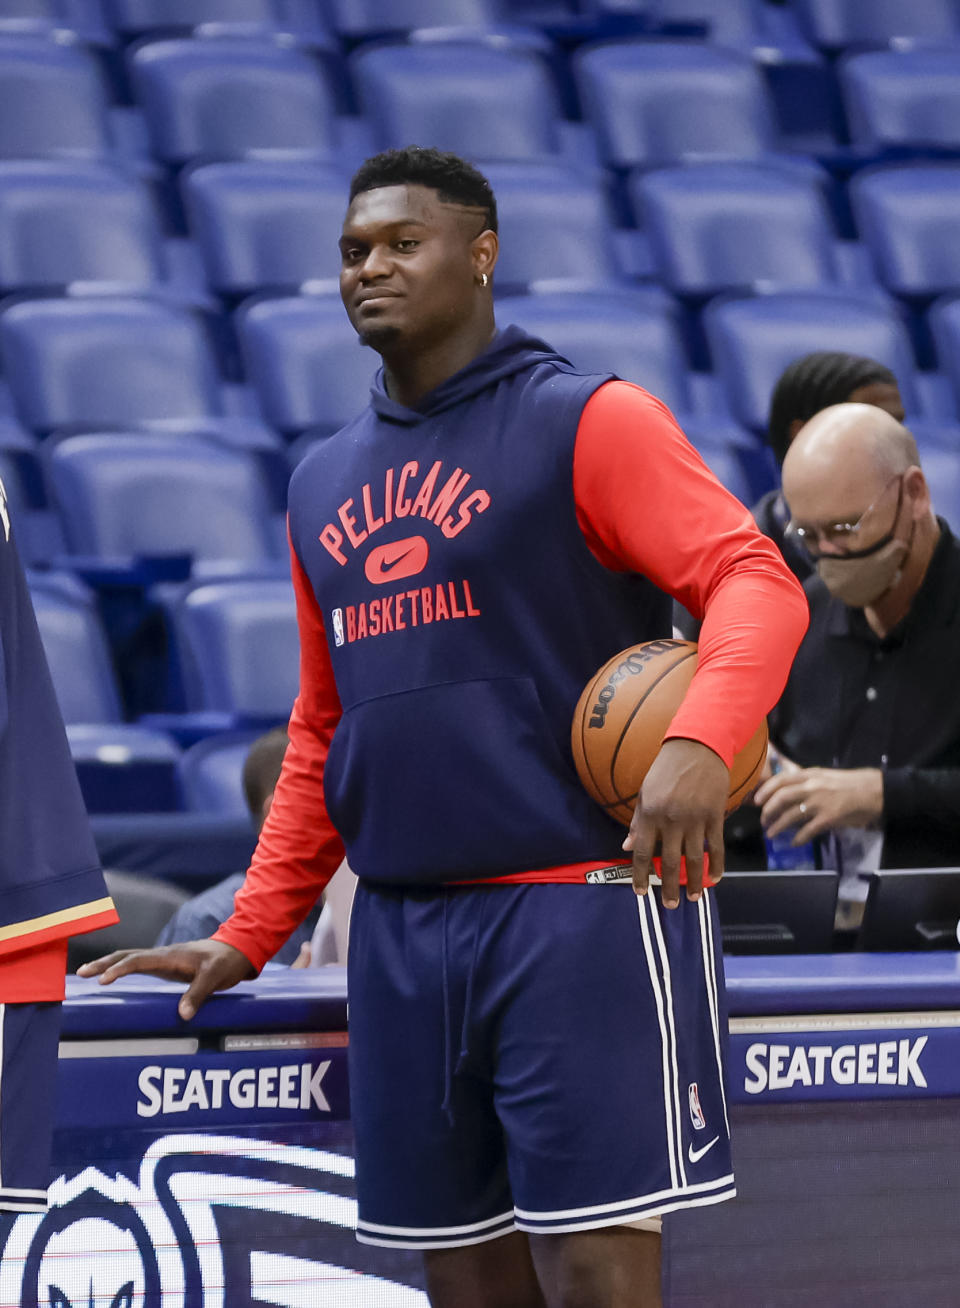 New Orleans Pelicans forward Zion Williamson (1) stands out on the court during warm ups before the tip off of an NBA basketball game against the New York Knicks in New Orleans, Saturday, Oct. 30, 2021. (AP Photo/Derick Hingle)